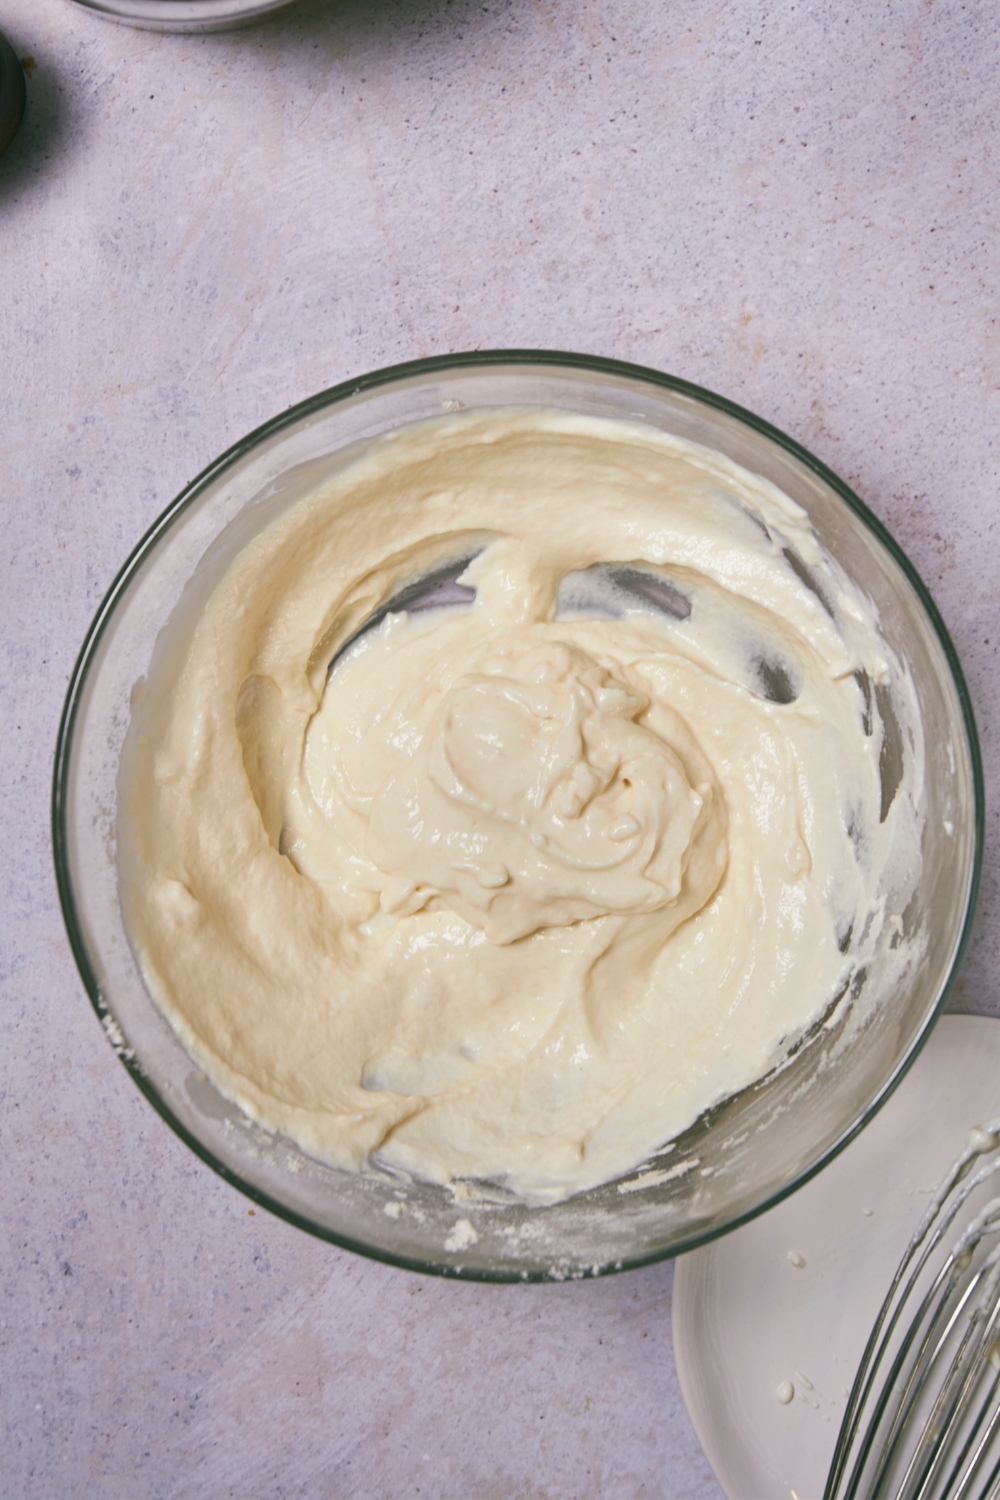 Creamy sour cream and flour mixture in a glass bowl.